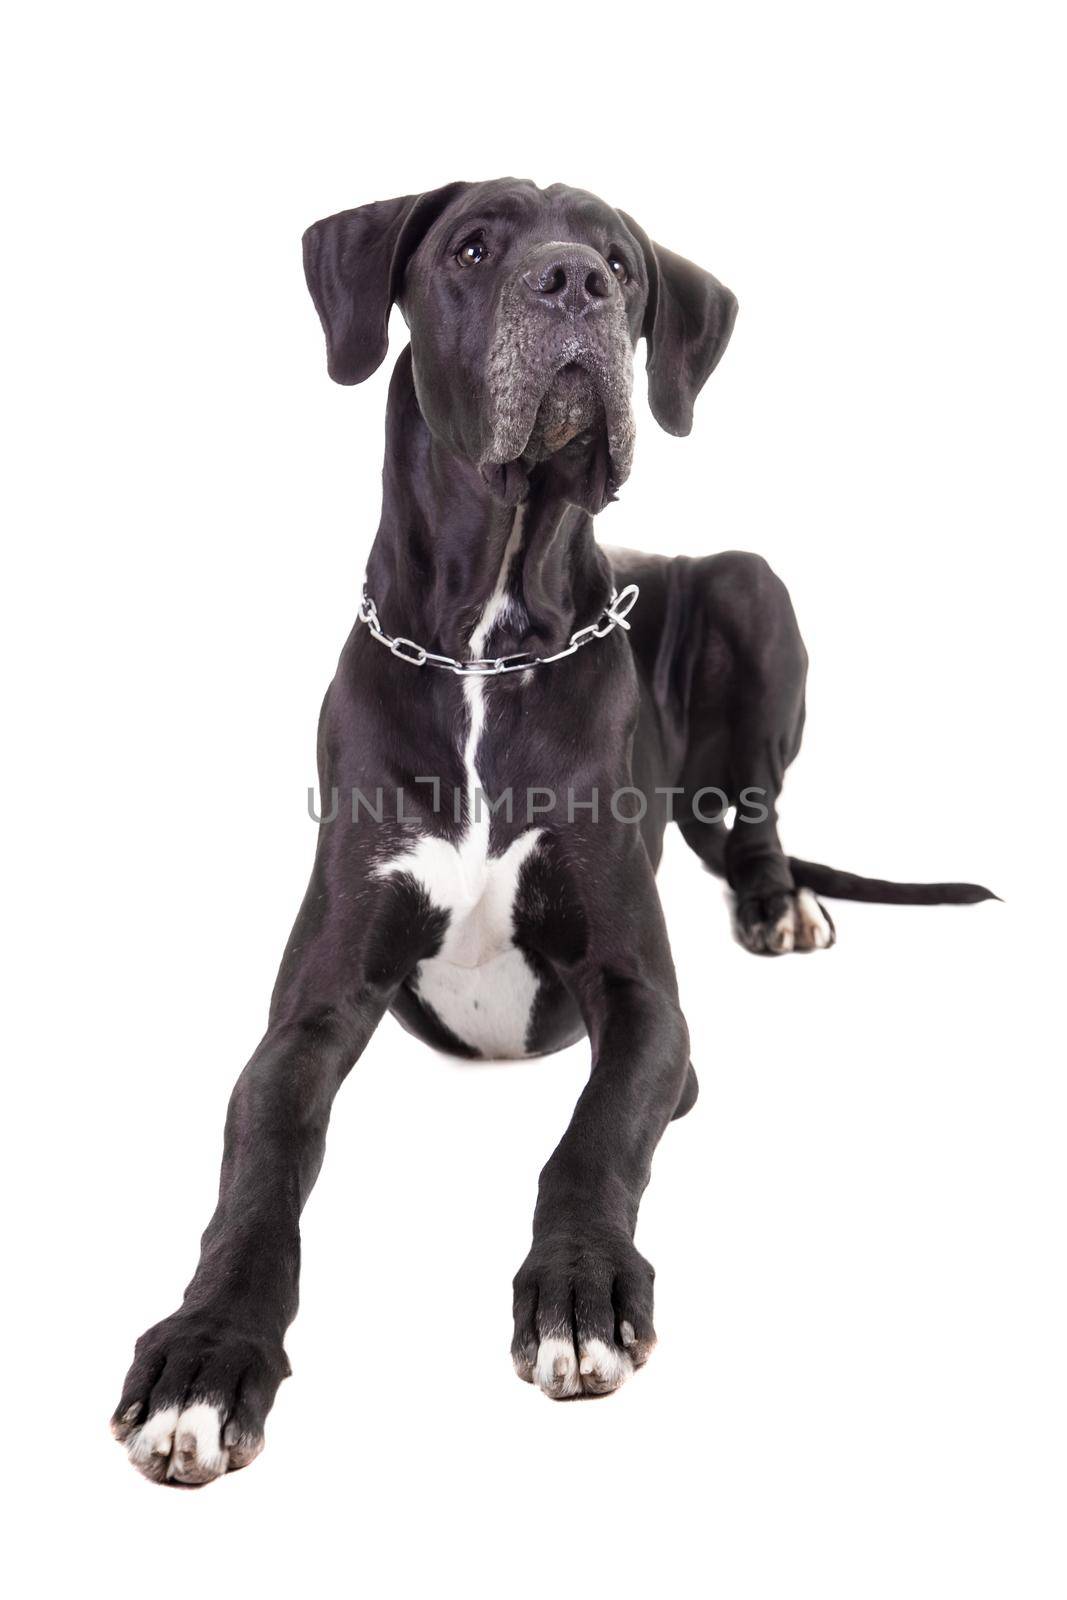 Black Great Dane on white by RosaJay